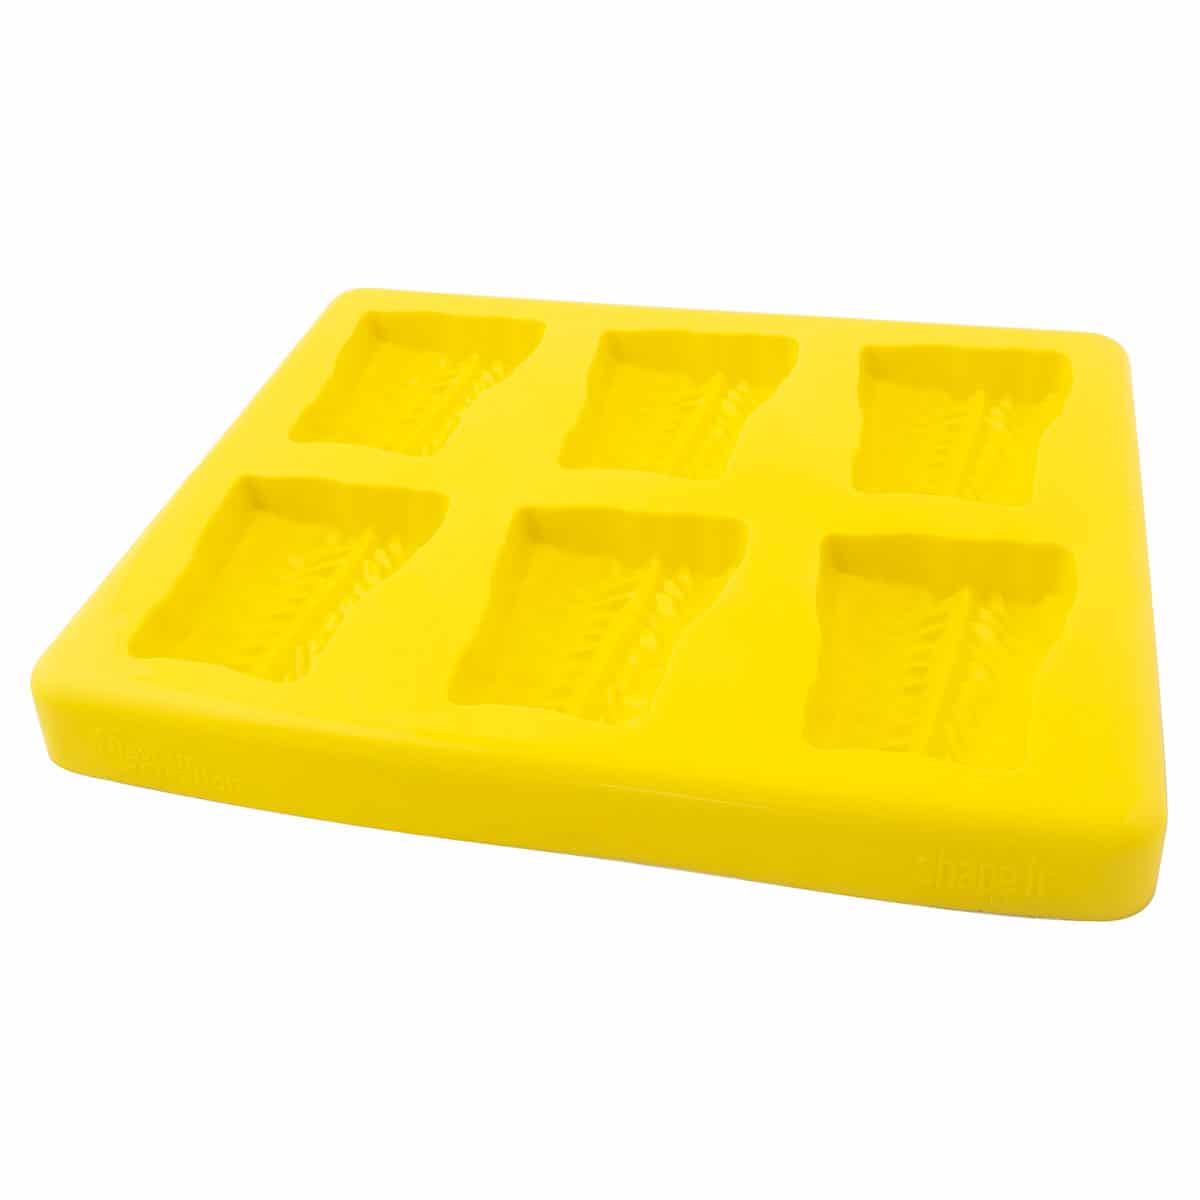 Flavour Creations Fish Food Mould (100ml)